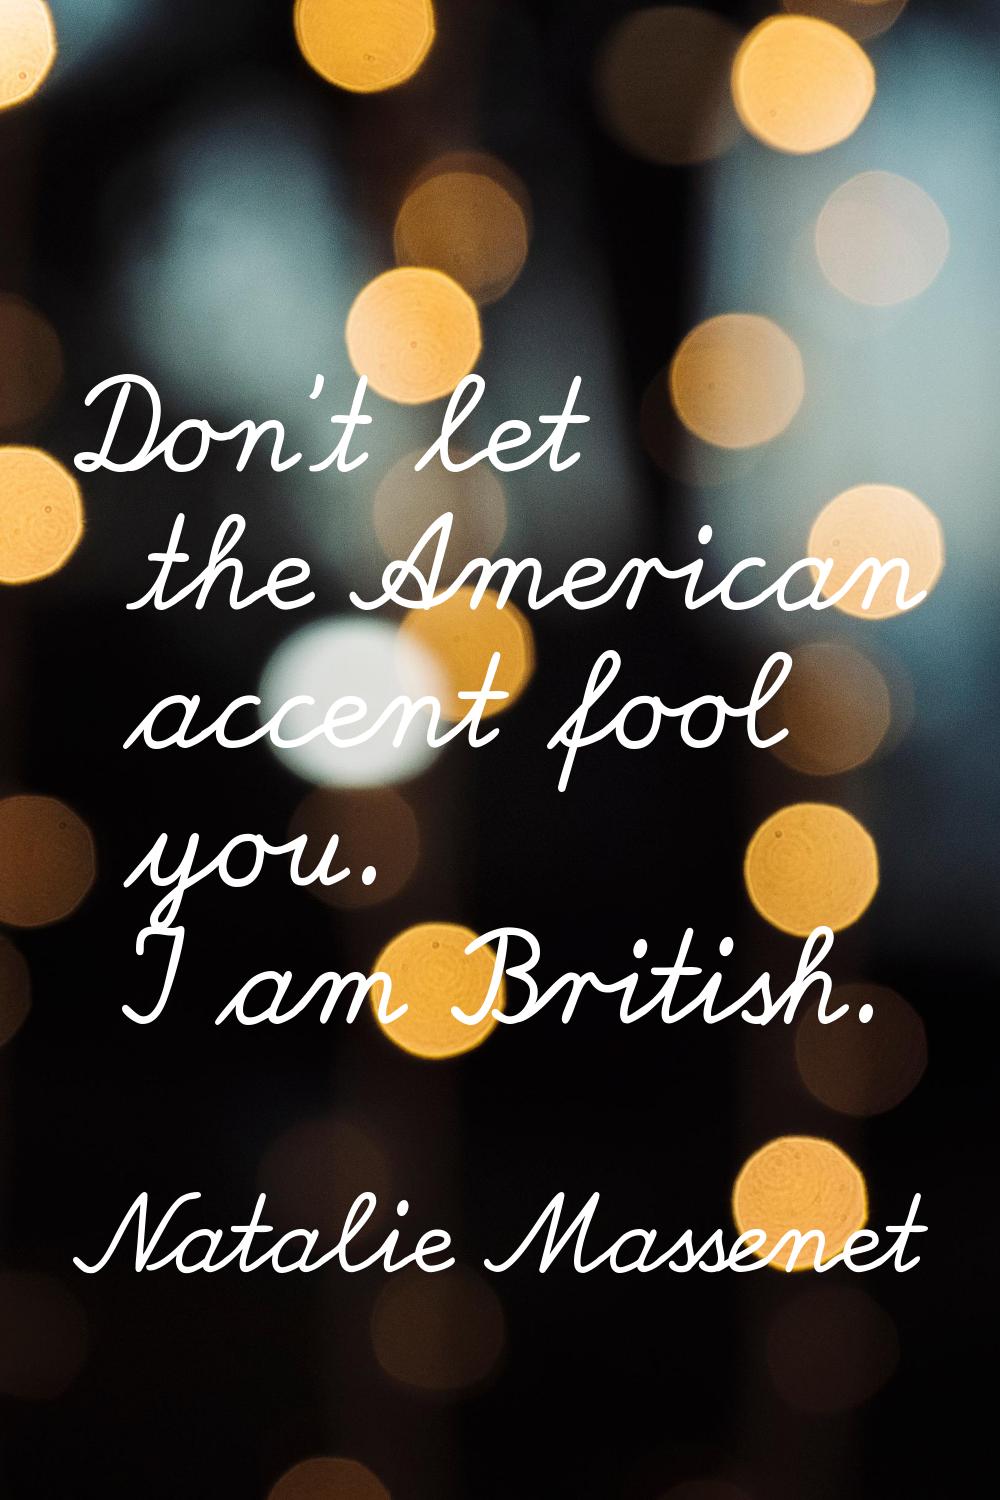 Don't let the American accent fool you. I am British.